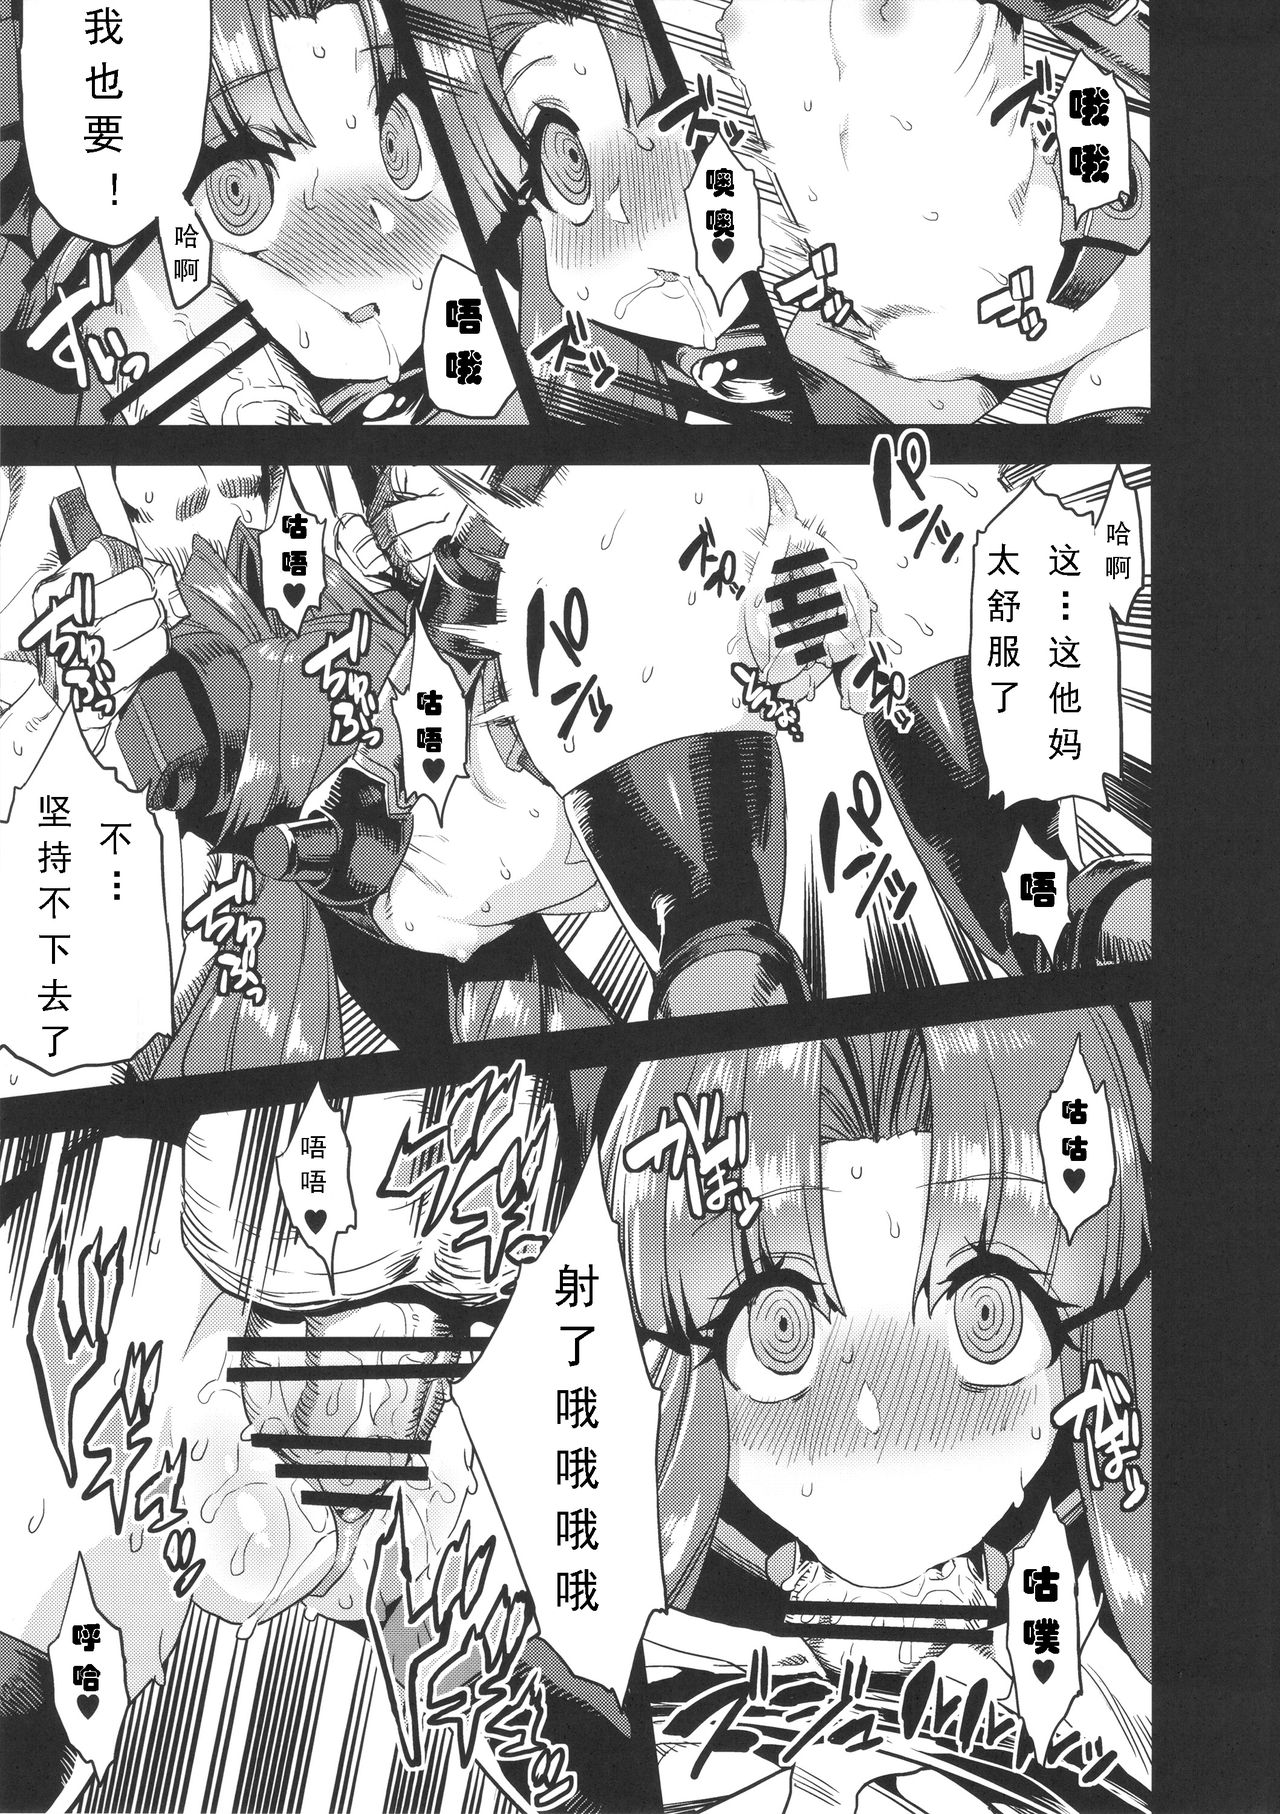 (C89) [OVing (Obui)] Hentai Marionette 4 (Saber Marionette J) [Chinese] [可乐个人汉化] page 15 full